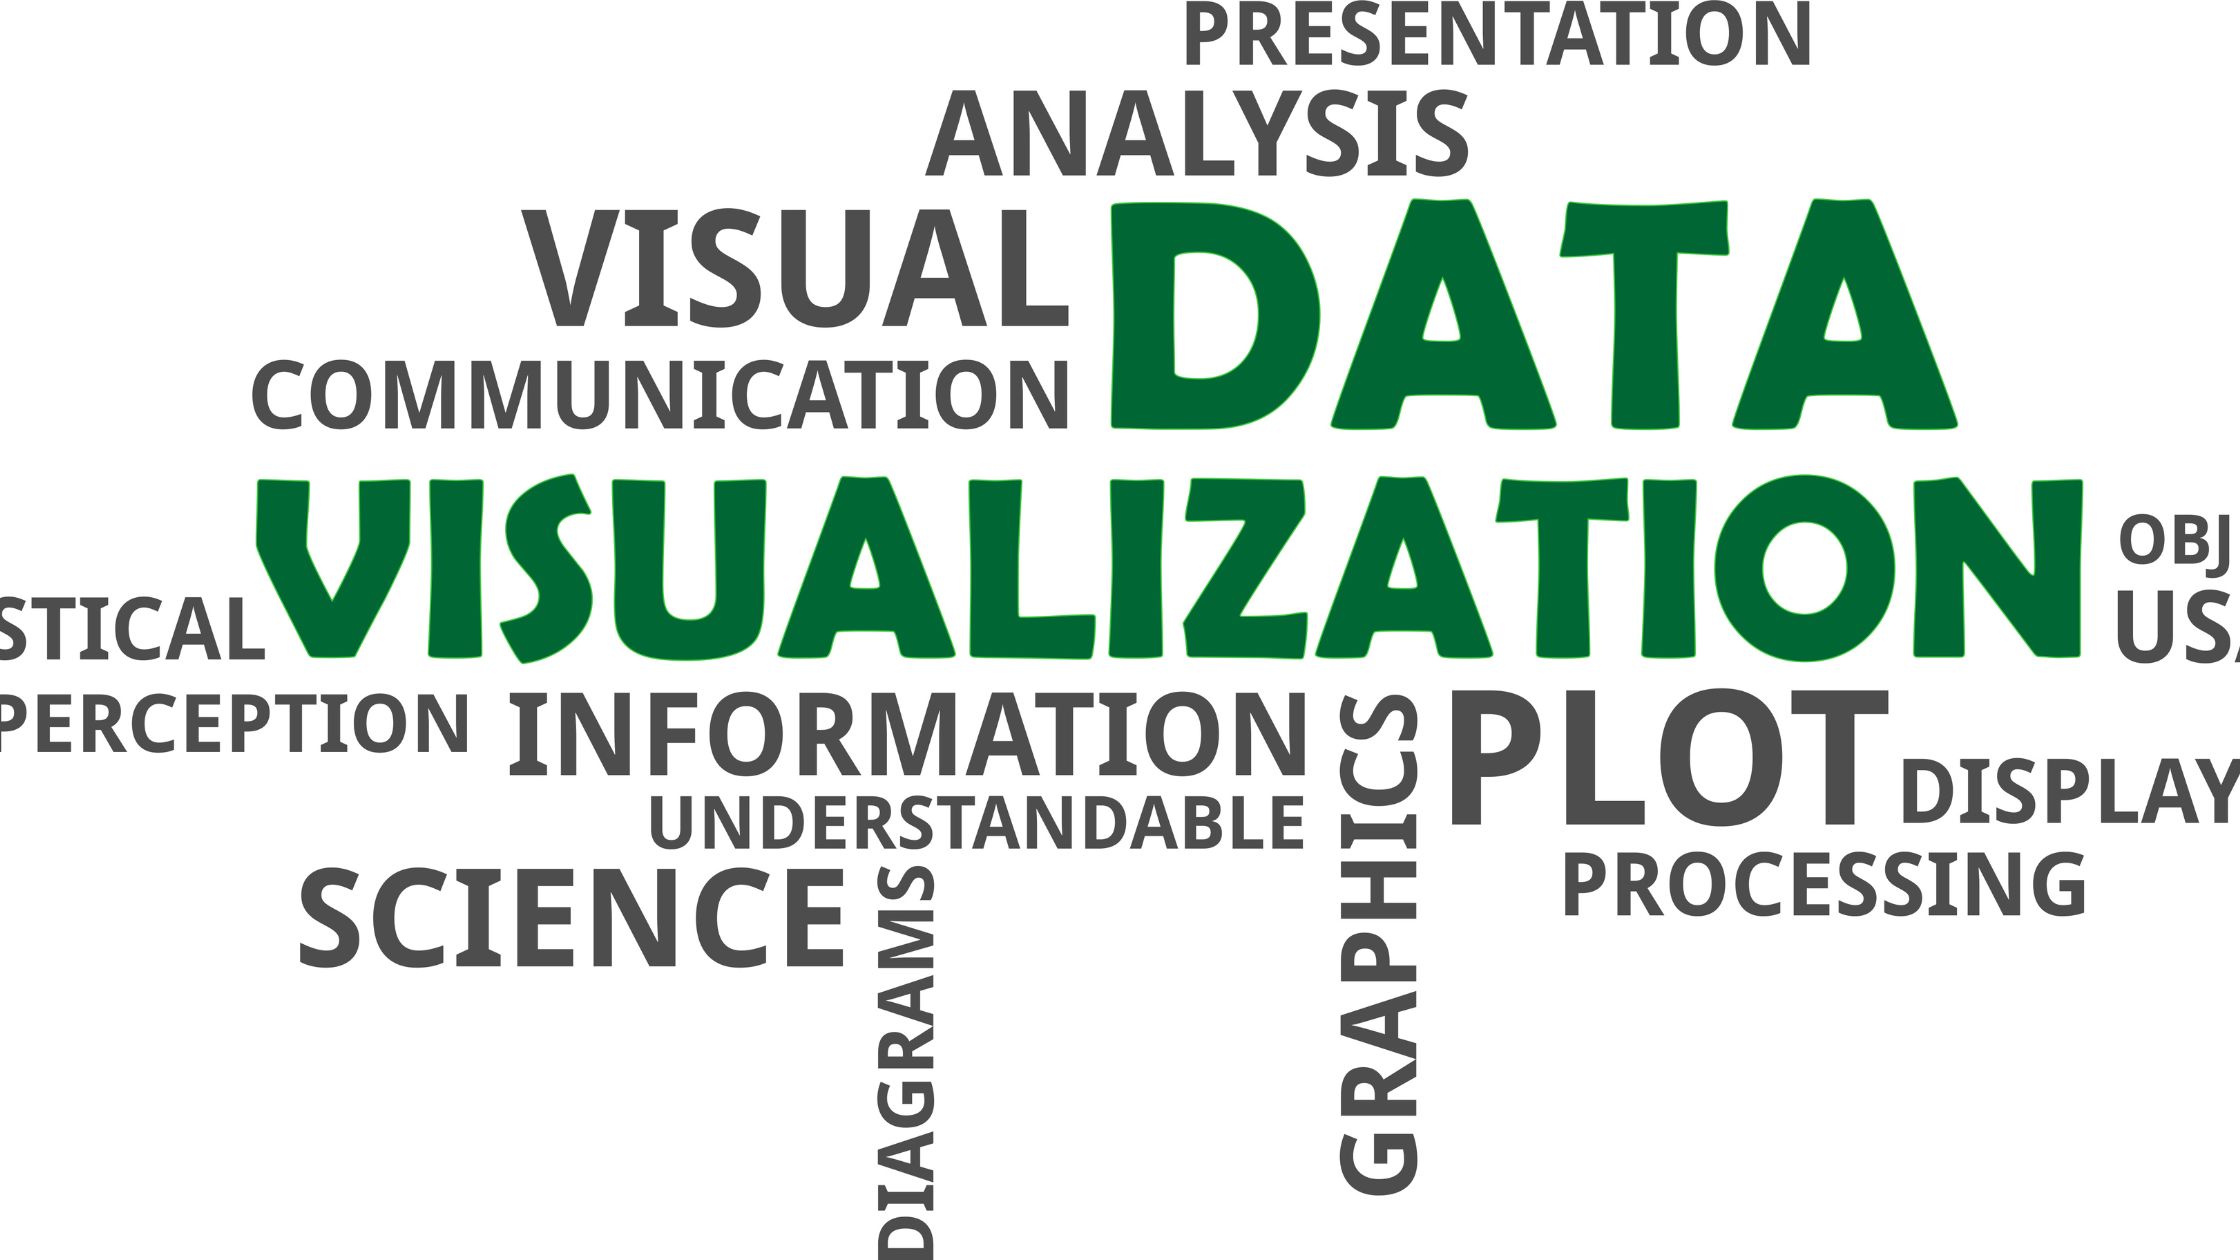 Guide to Hierarchical Data Visualization: Methods, Tools, & Tips